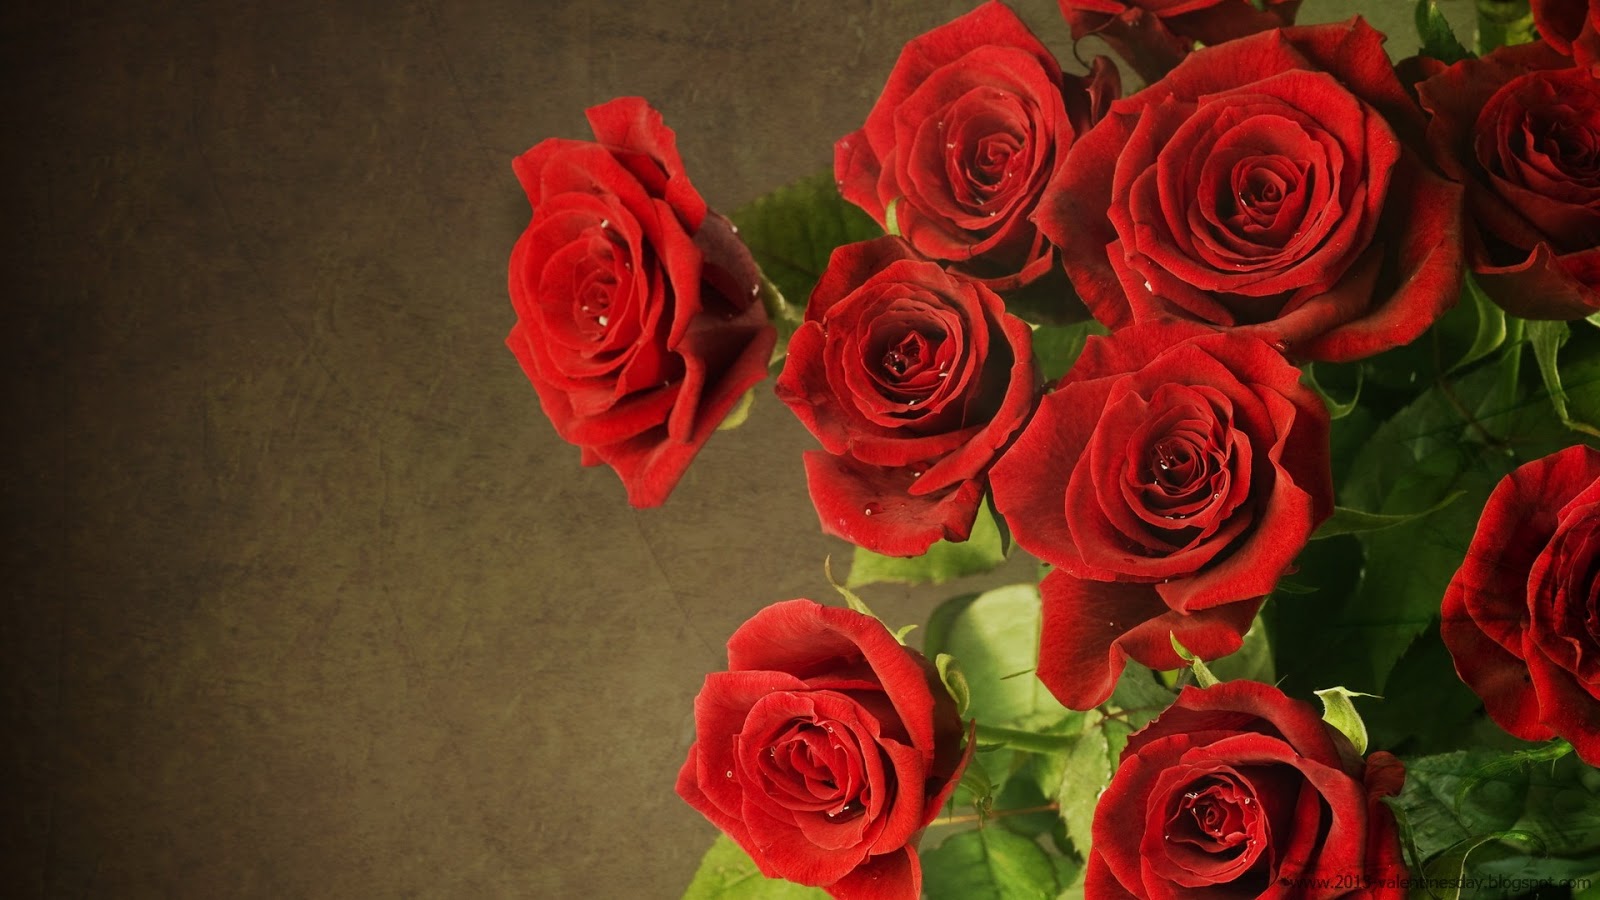 9. New Latest Happy Rose Day 2014 Hd Wallpapers